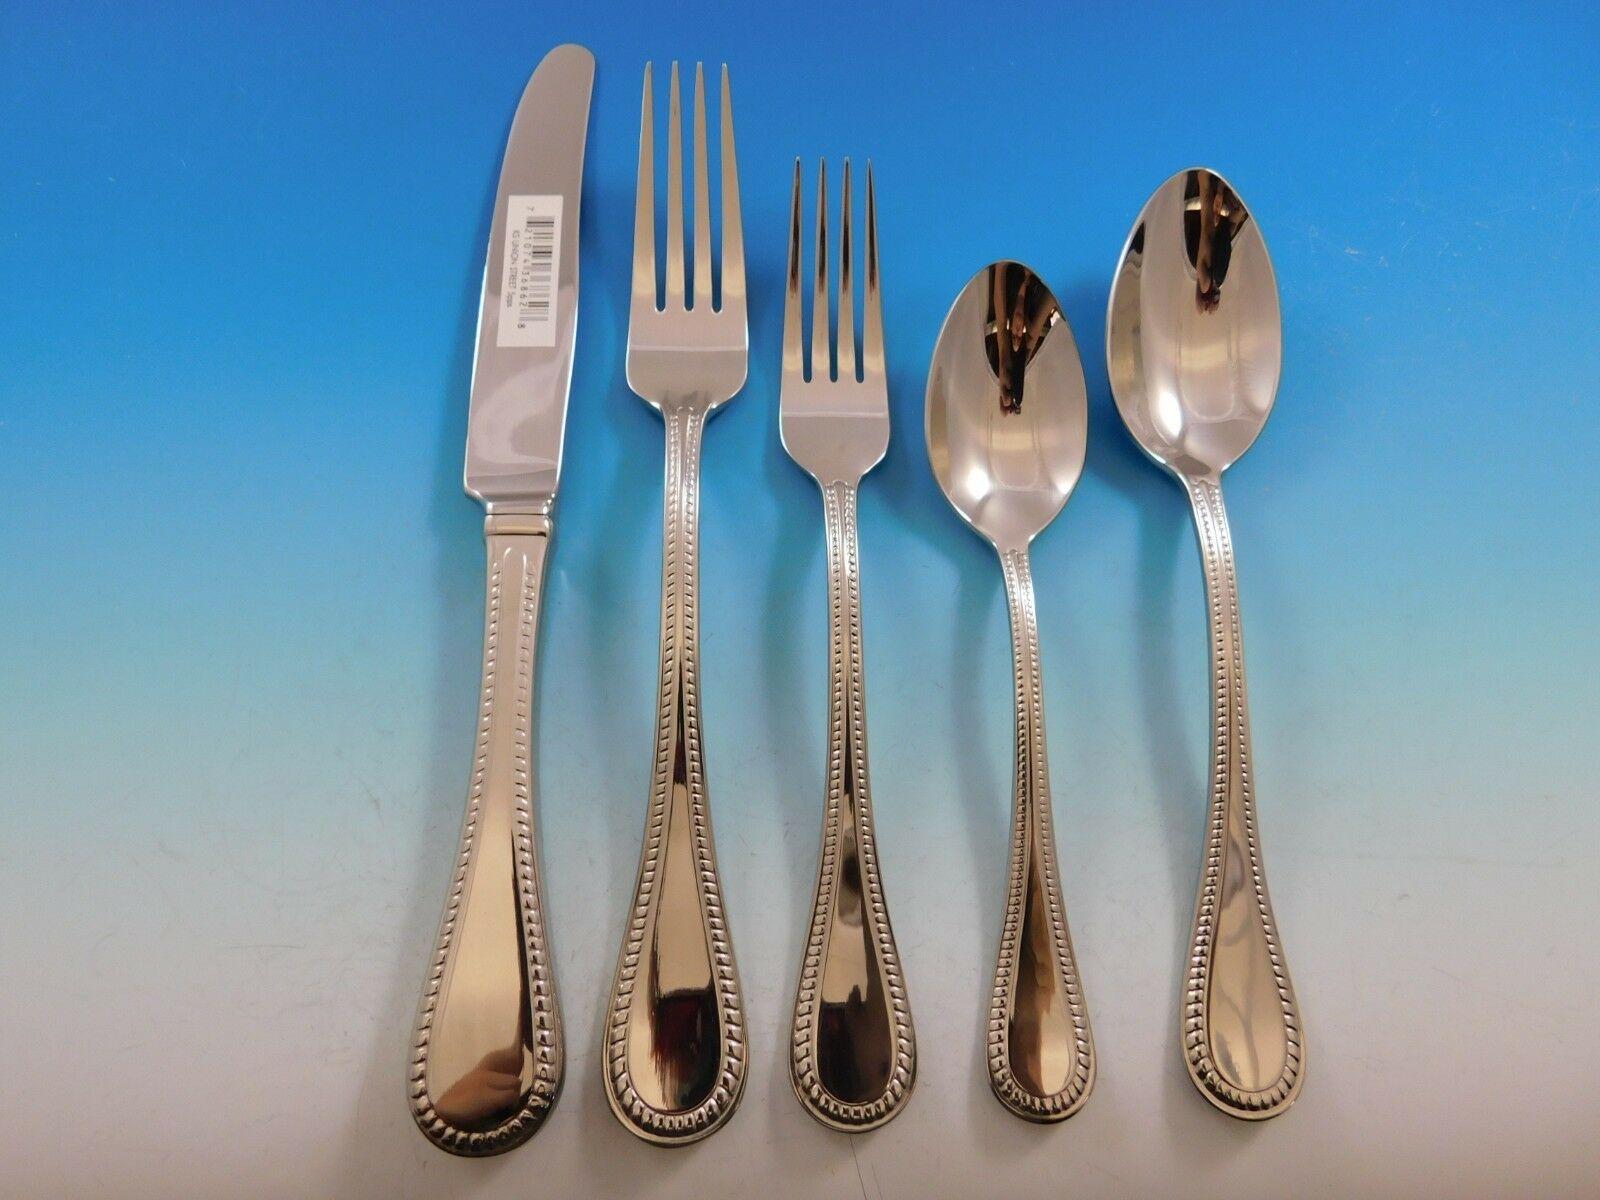 The flared handles of the classic-yet-contemporary kate spade new york Union Street flatware set are trimmed with stitched detailing. Perfect for both causal and formal dinnerware, this is flatware at its finest.

Features:
18/10 stainless